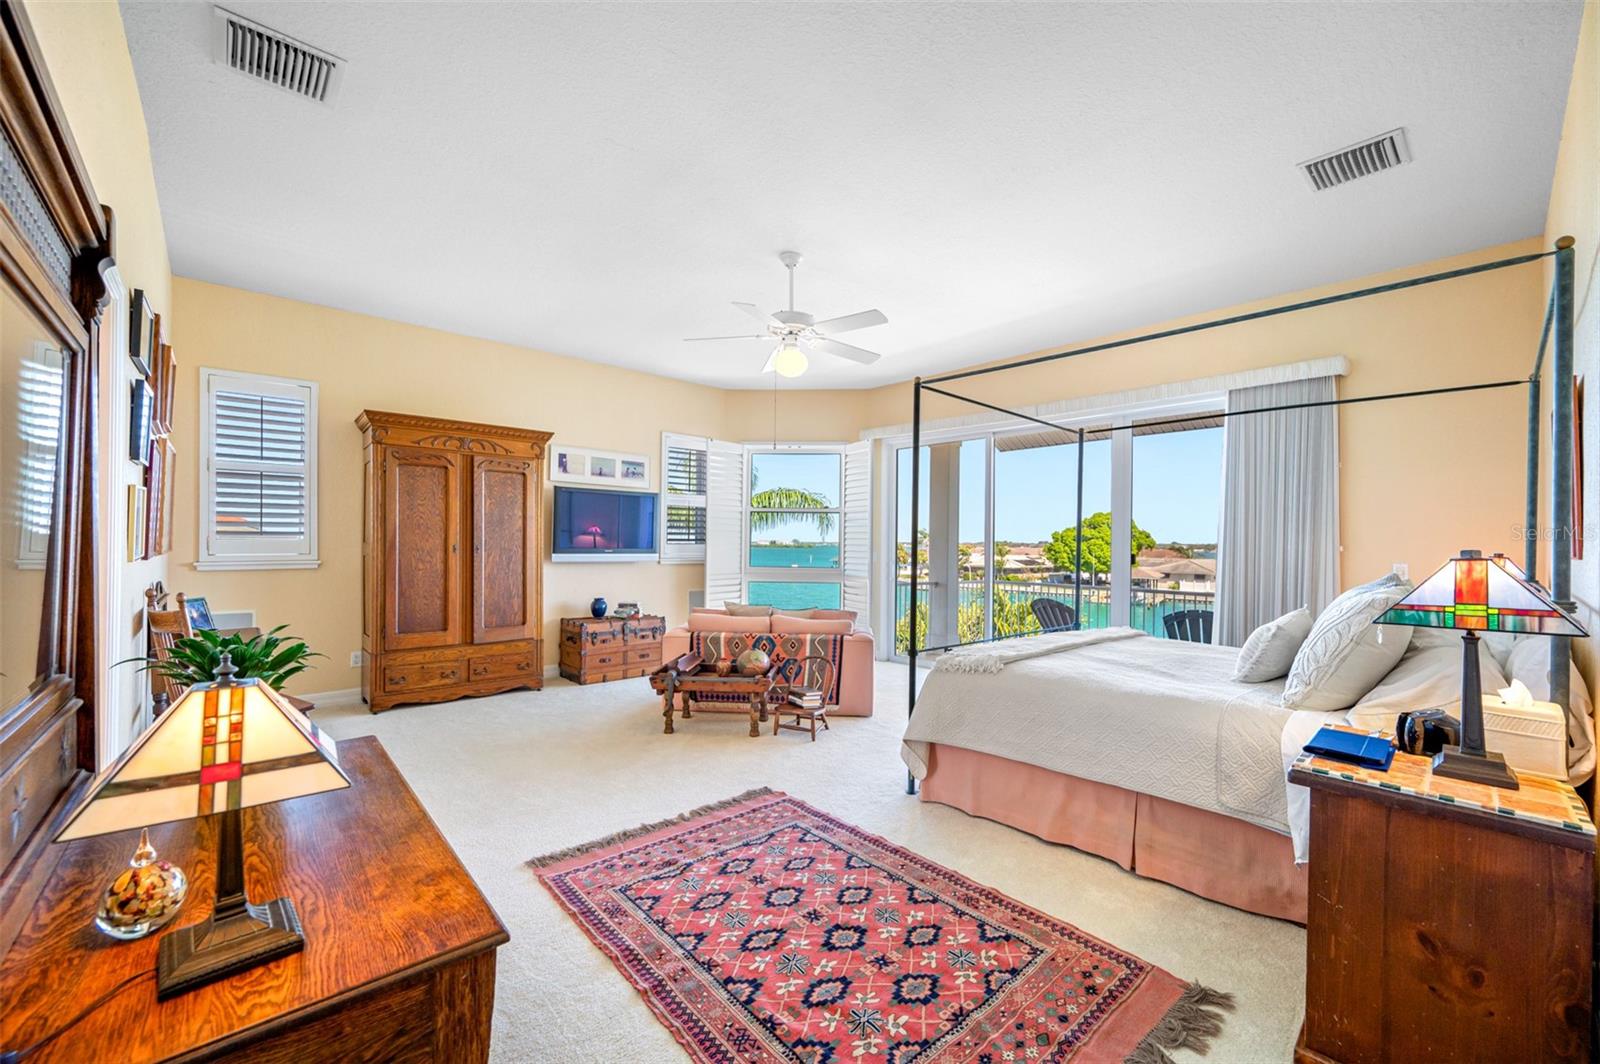 Primary bedroom suite with sitting area, magnificent views, and access to the balcony overlooking Clearwater Harbor